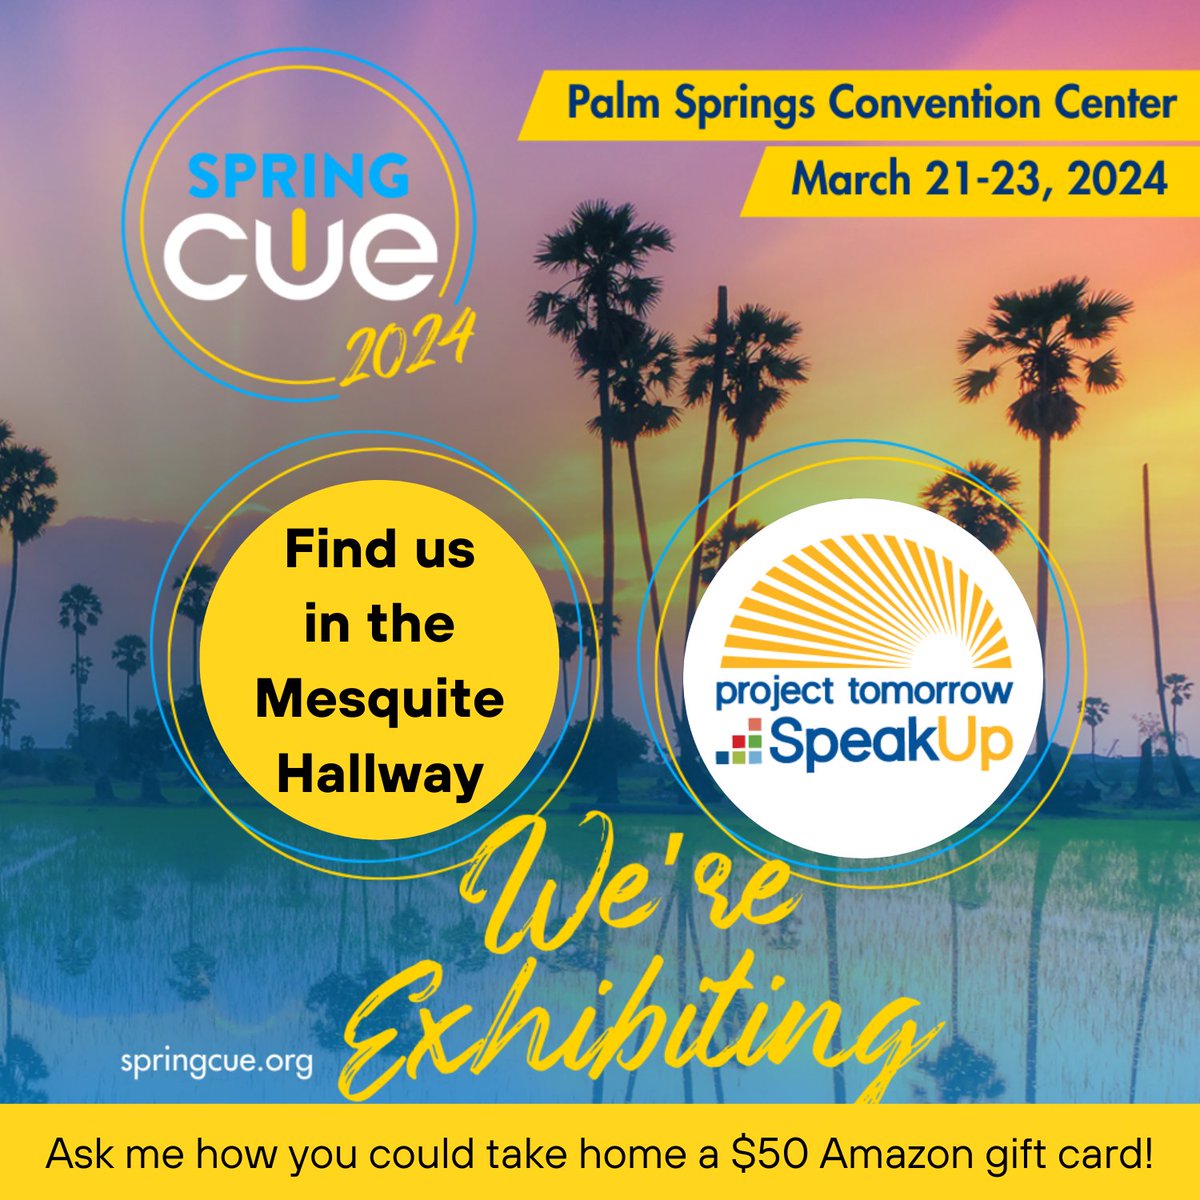 🛑Stop by the #SpringCUE Mesquite Hallway to connect with #SpeakUpEd Project Director, Michelle Green @mrg_3! ✅Learn more about our #AI in K-12 education survey: tomorrow.org/speakup101/